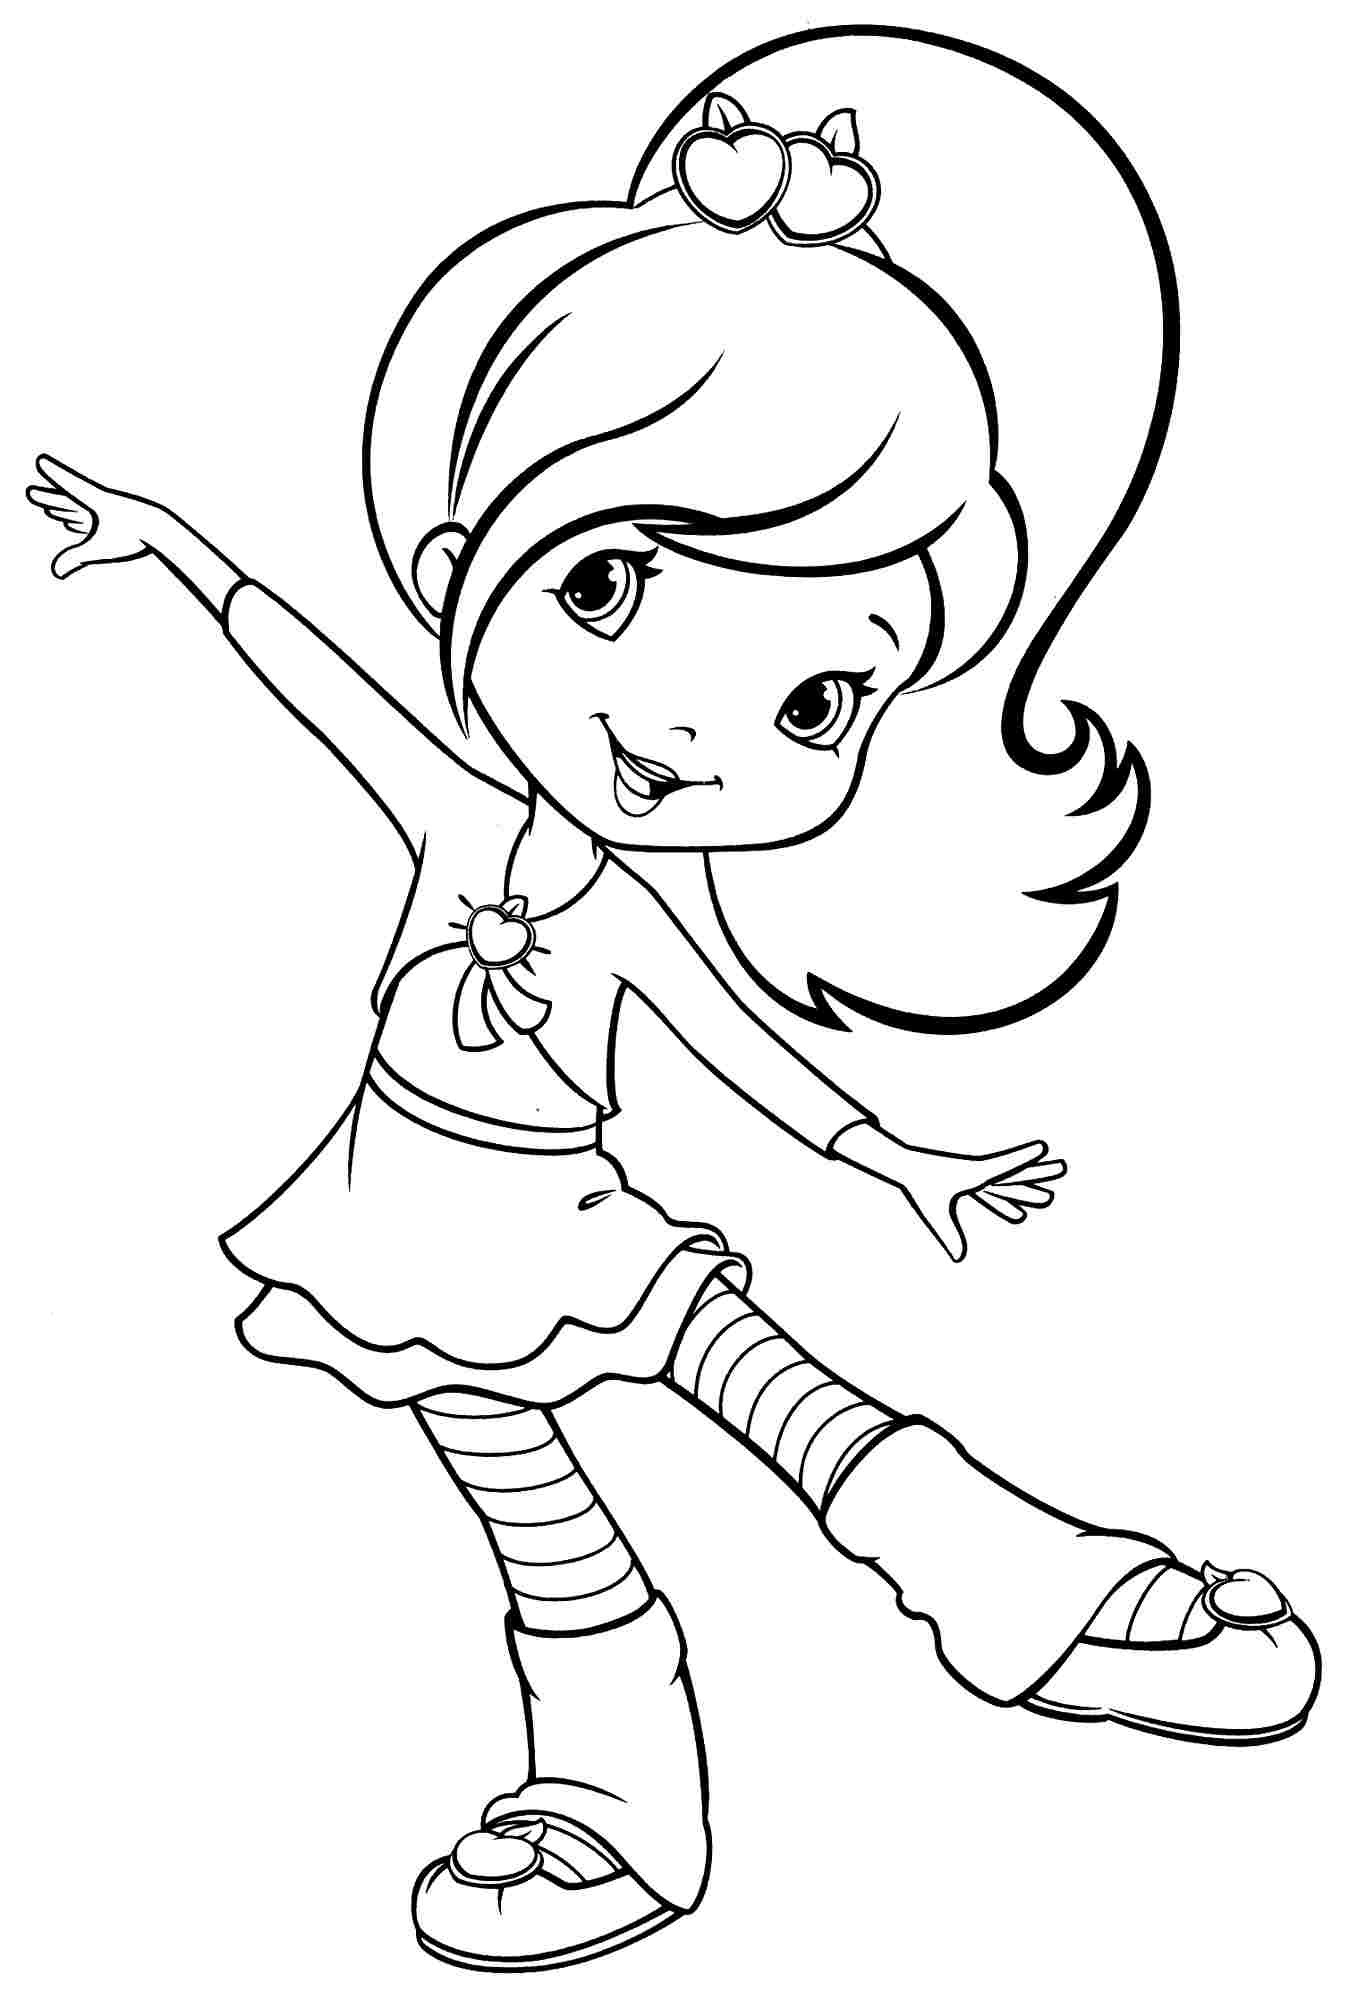 Coloring Sheets For Girls Movies
 Coloring Pages for Girls Best Coloring Pages For Kids